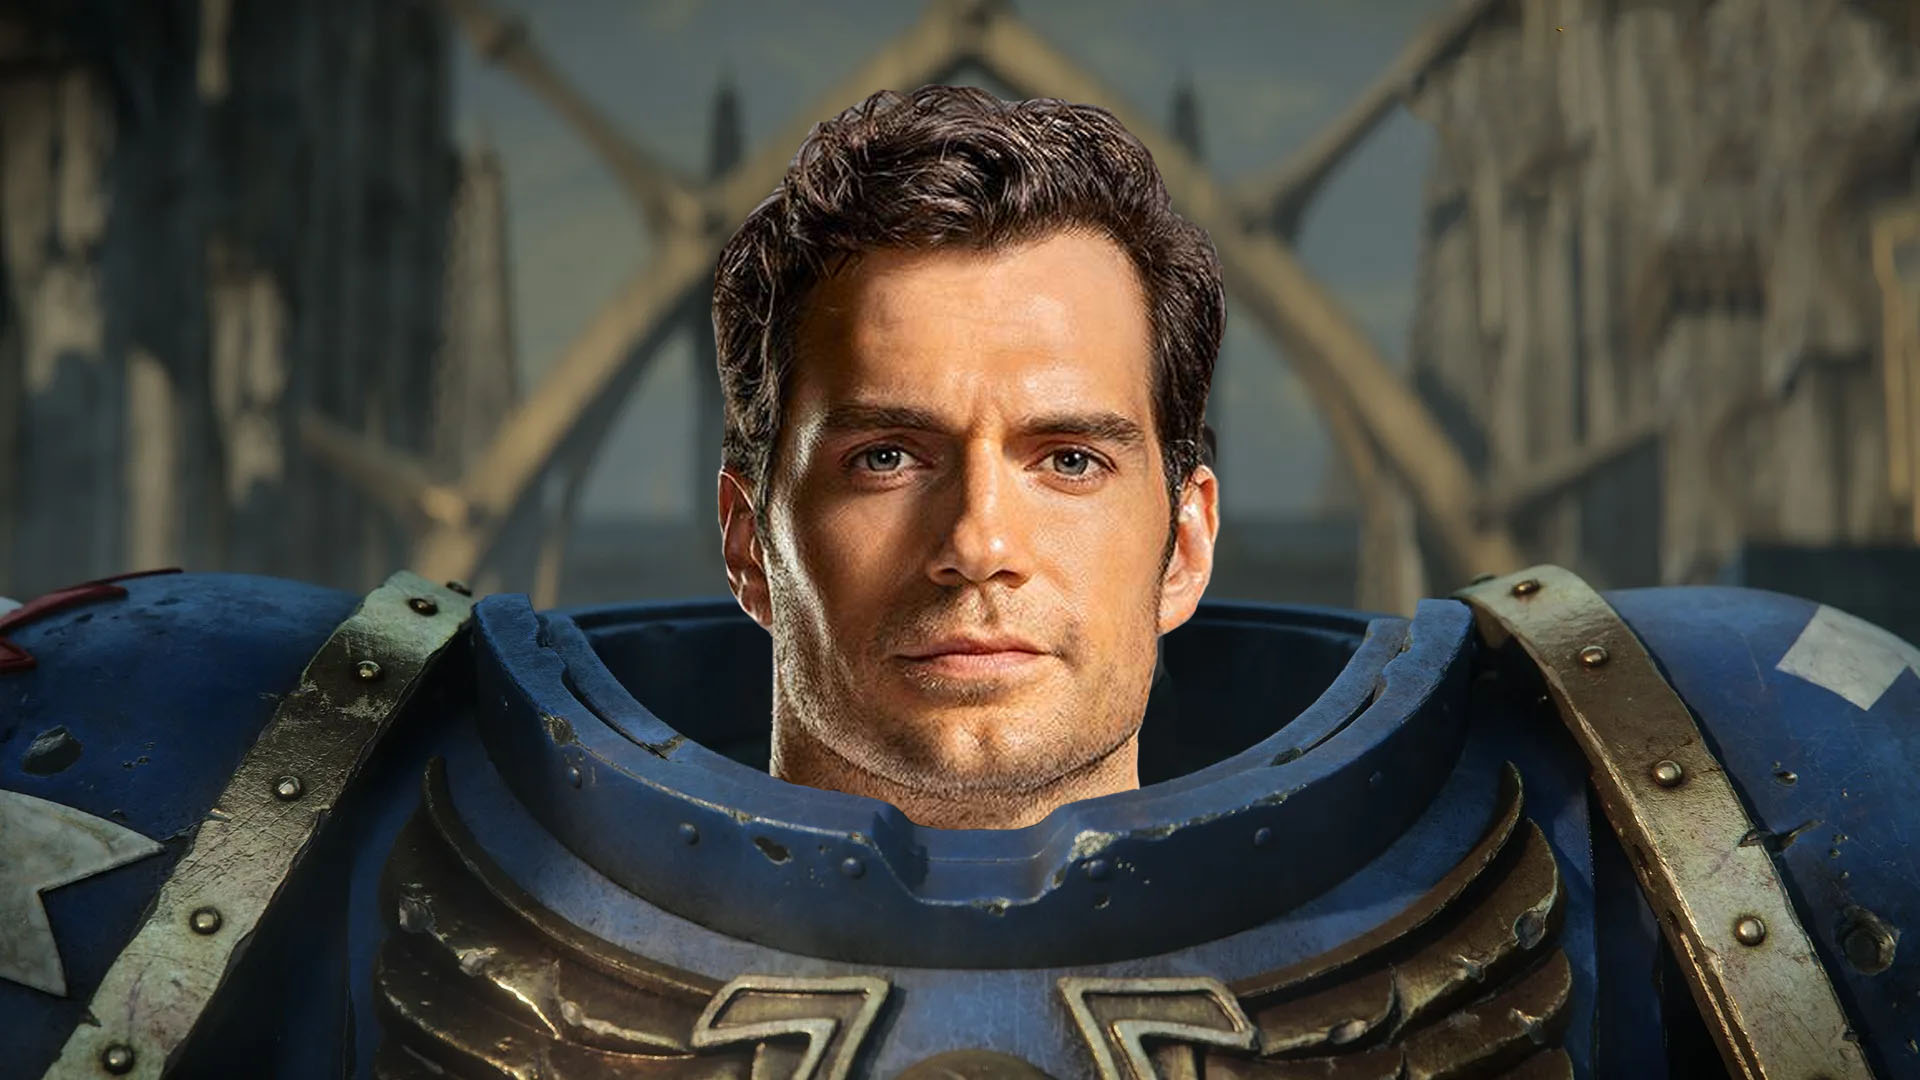 Henry Cavill announces Warhammer 40,000 series with Amazon